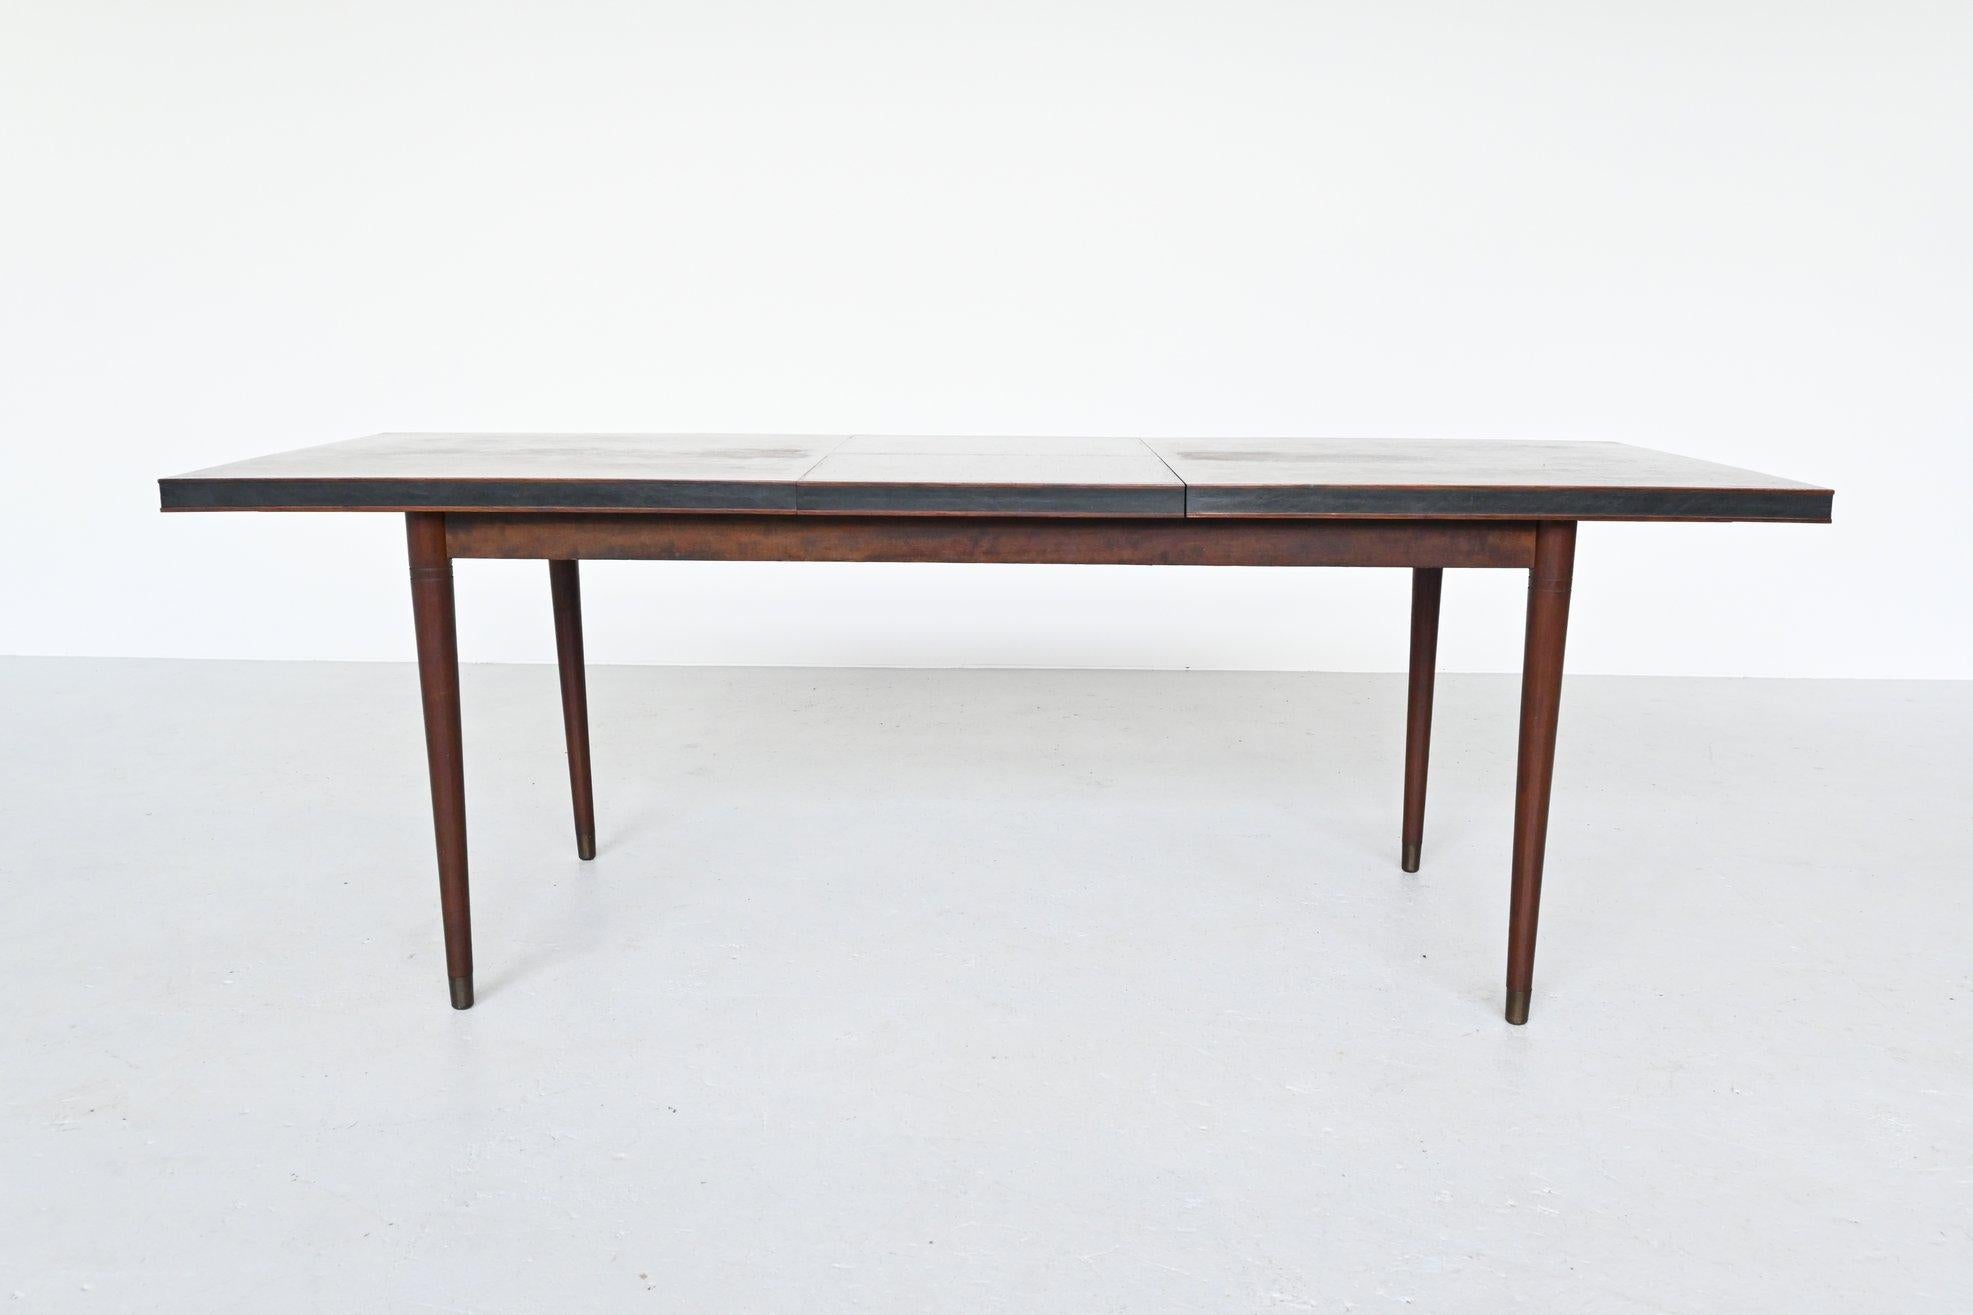 Beautiful shaped rosewood extendable dining table, Denmark, 1960. It has a very nice grain to the warm rosewood veneer. This large dining table can be easily extended by extending the left and right part and folding out the middle part. The legs can